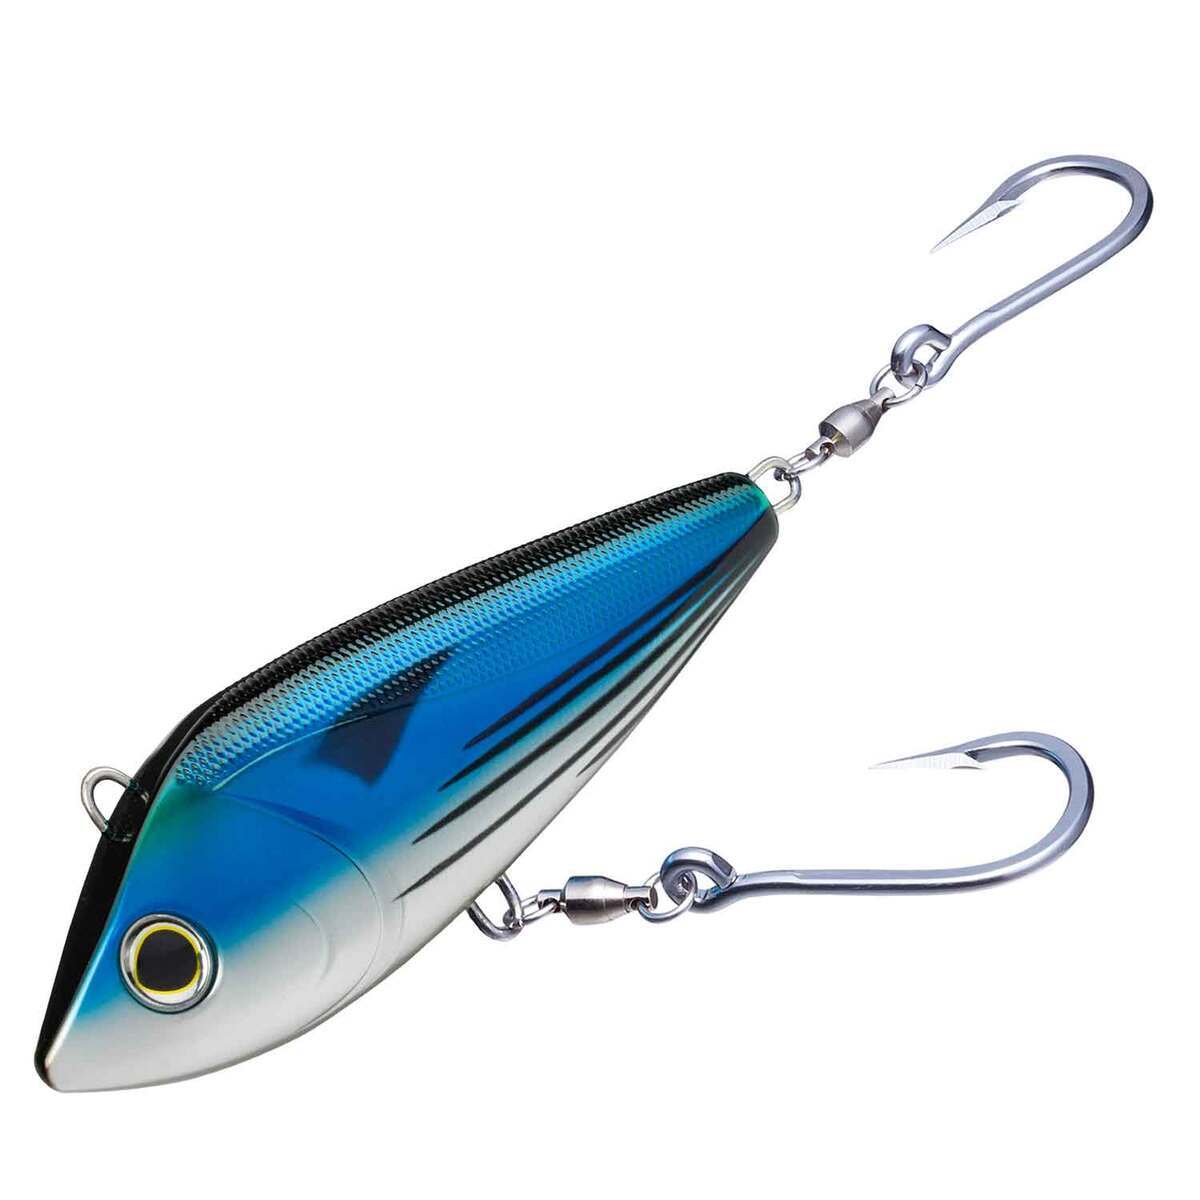 10 Yo Zuri fishing lures new and like new fishing lures LN - sporting goods  - by owner - sale - craigslist